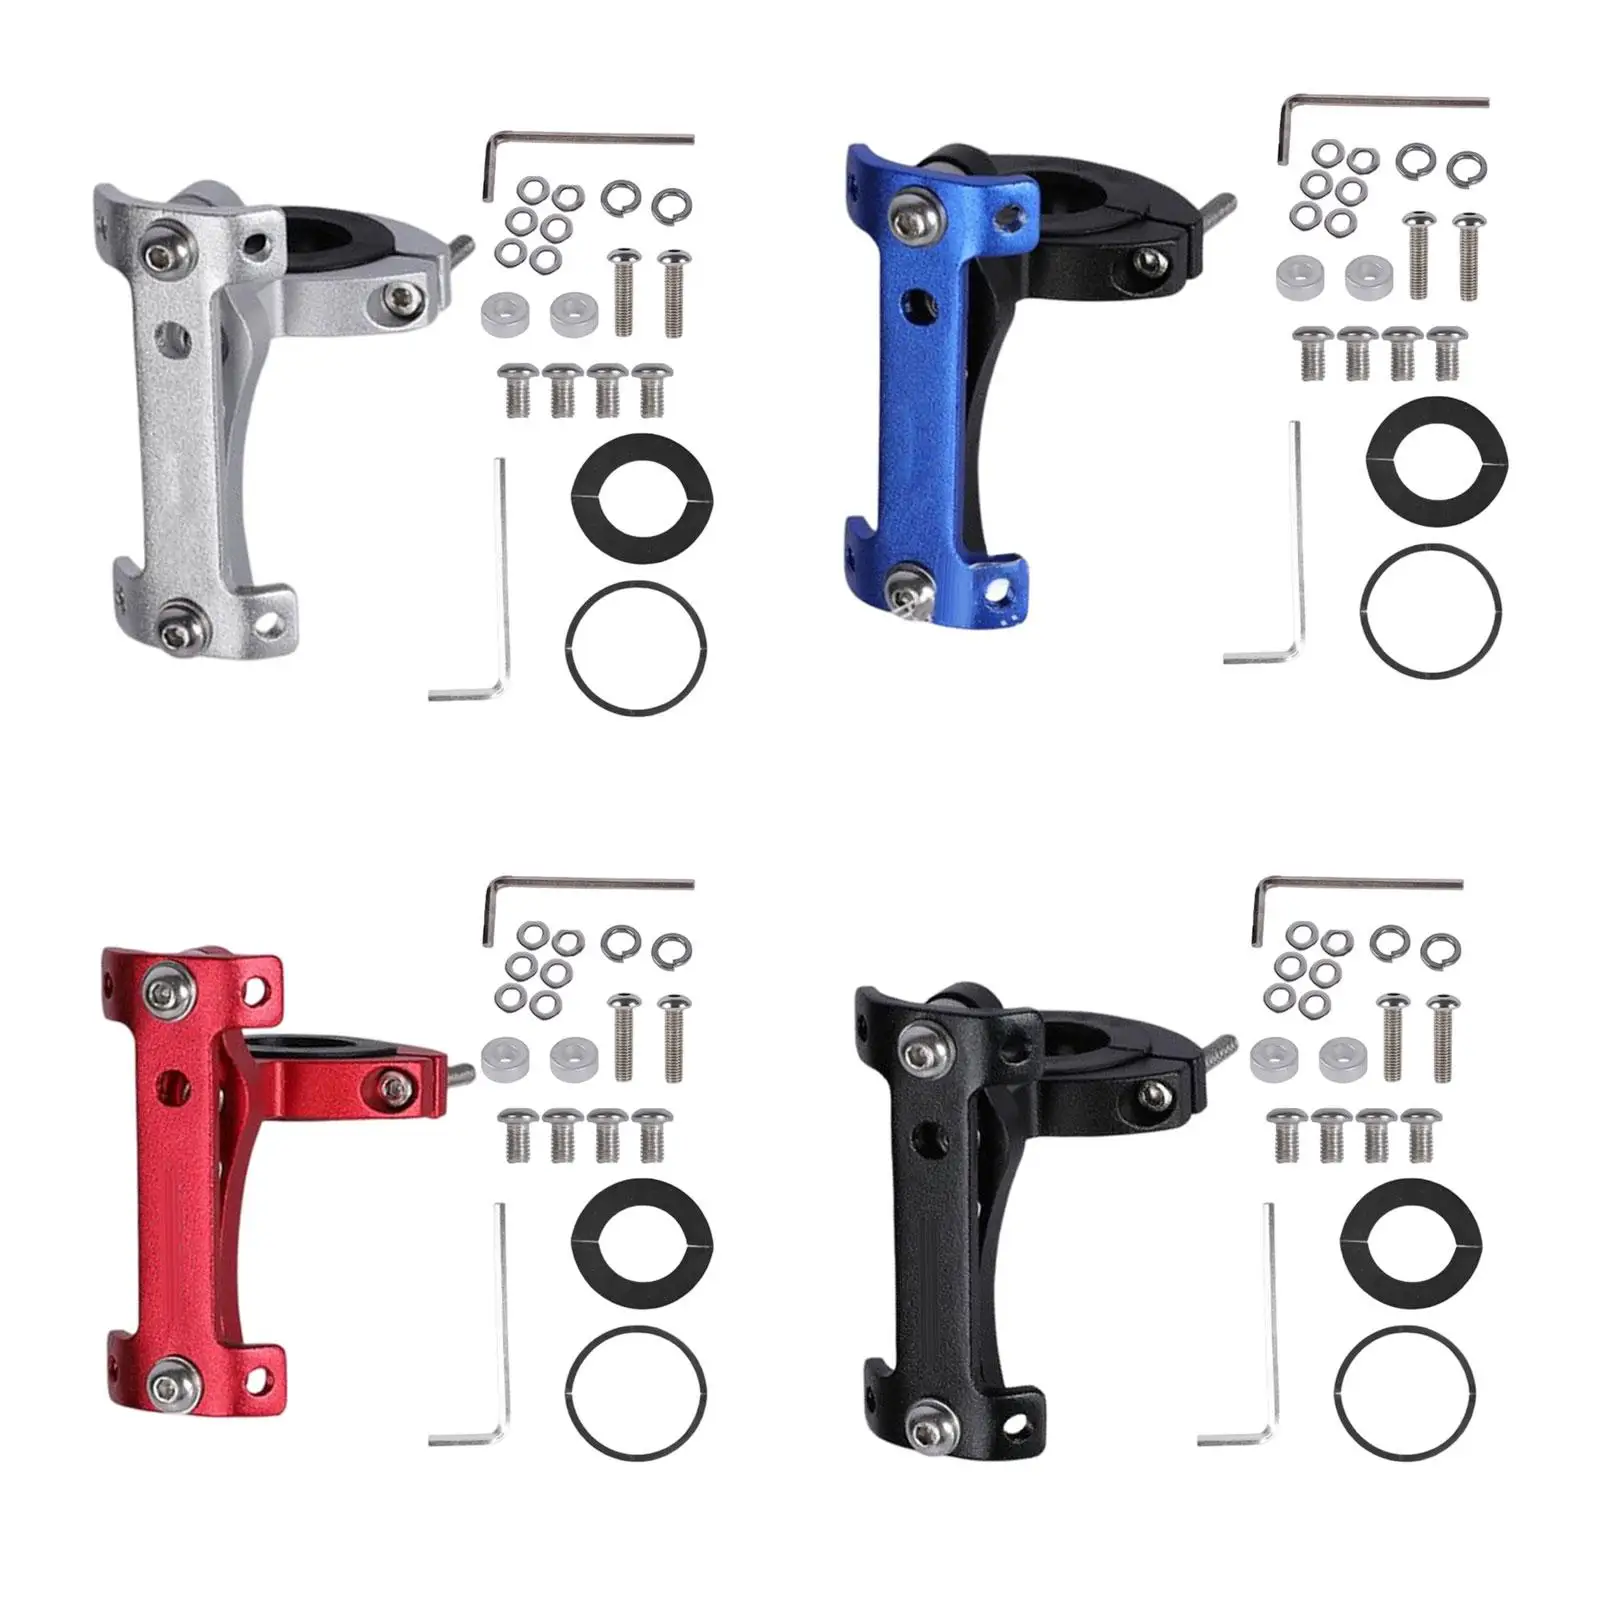 Bike Double Water Bottle Extension Rack Stable Easy to Install Aluminium Alloy Bottle Cage Mount for Bike Cycling Attachment